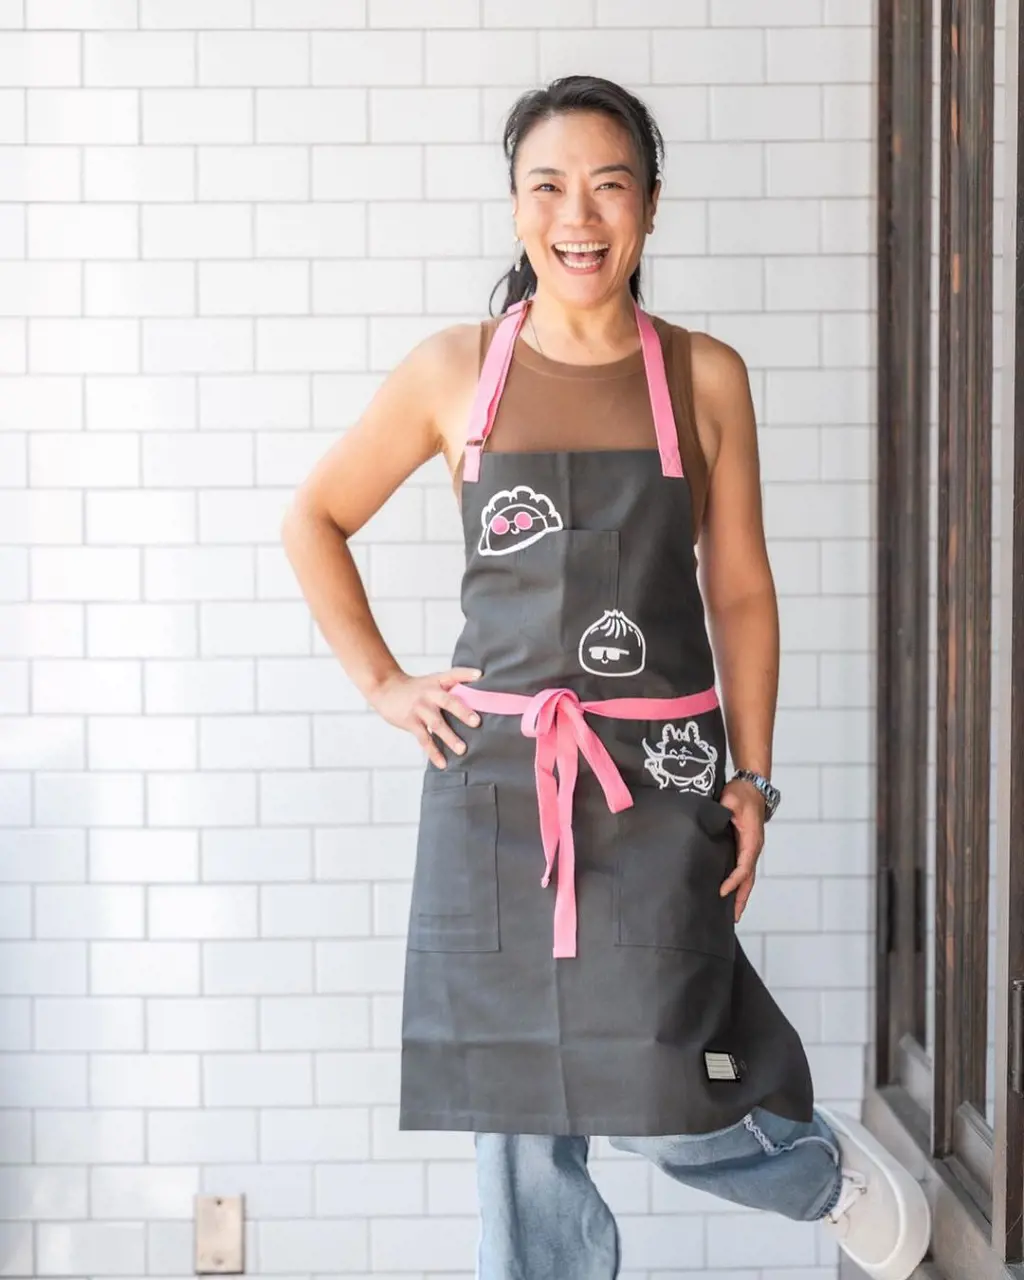 Chef Shirley Chung started her brand new restaurant Ms Chi Cafe recently